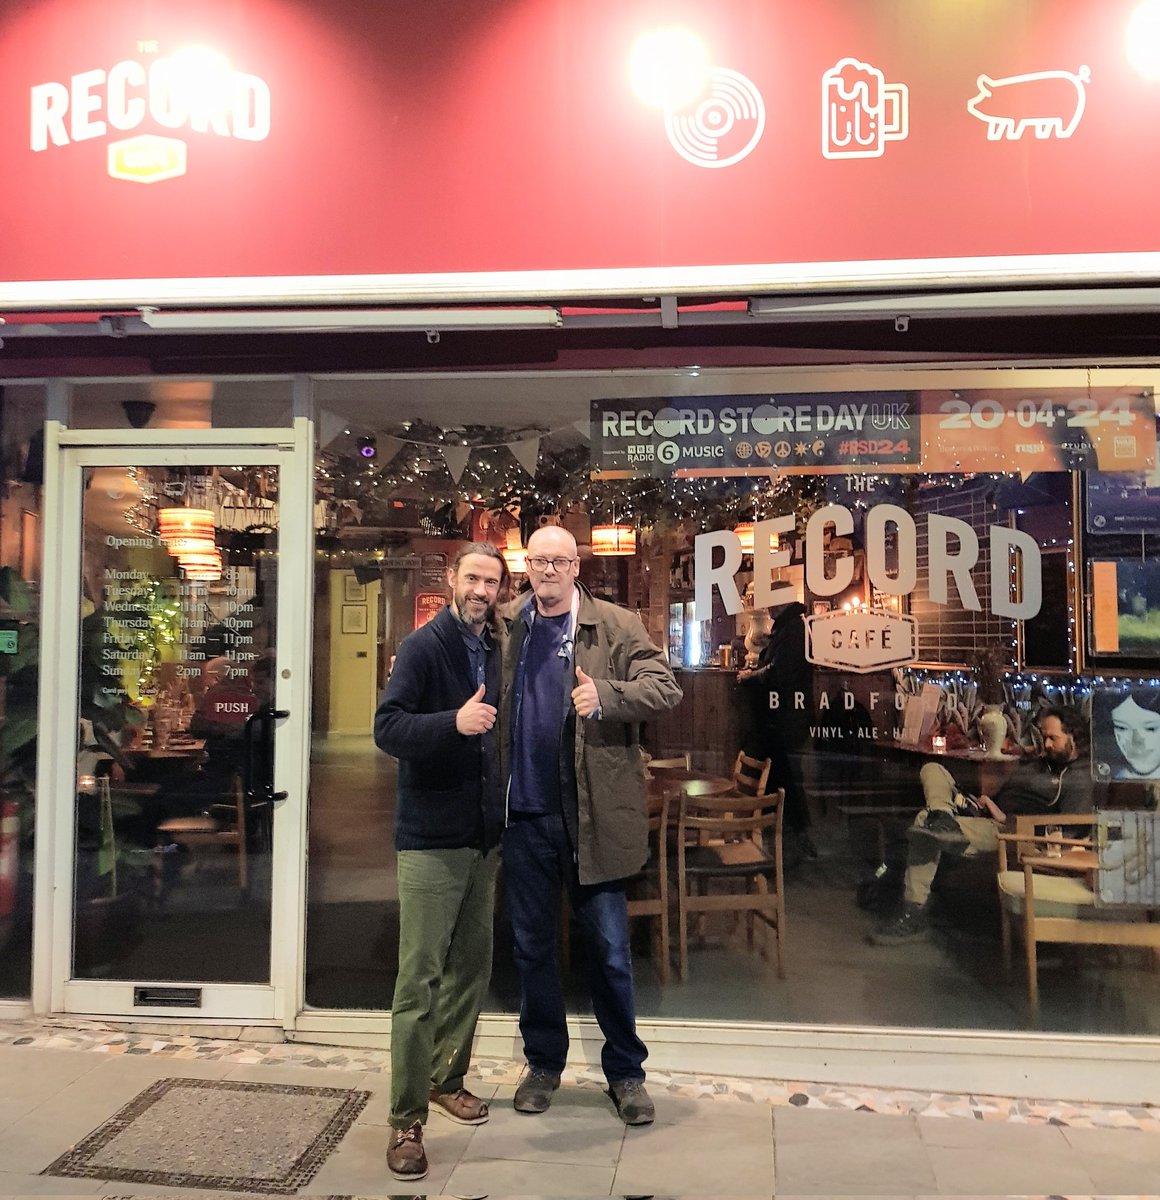 Bradford's finest bar @TheRecordCafe A bit of extra research for our FREE talk about legendary Hey's Brewery Ladies FC + CC tomorrow Sat 17 with @BreweryHeys @davidpendleton0 Beer is sublime @justaballgame @footballandwar #Bradford @EmmaC_TandA @officialbantams